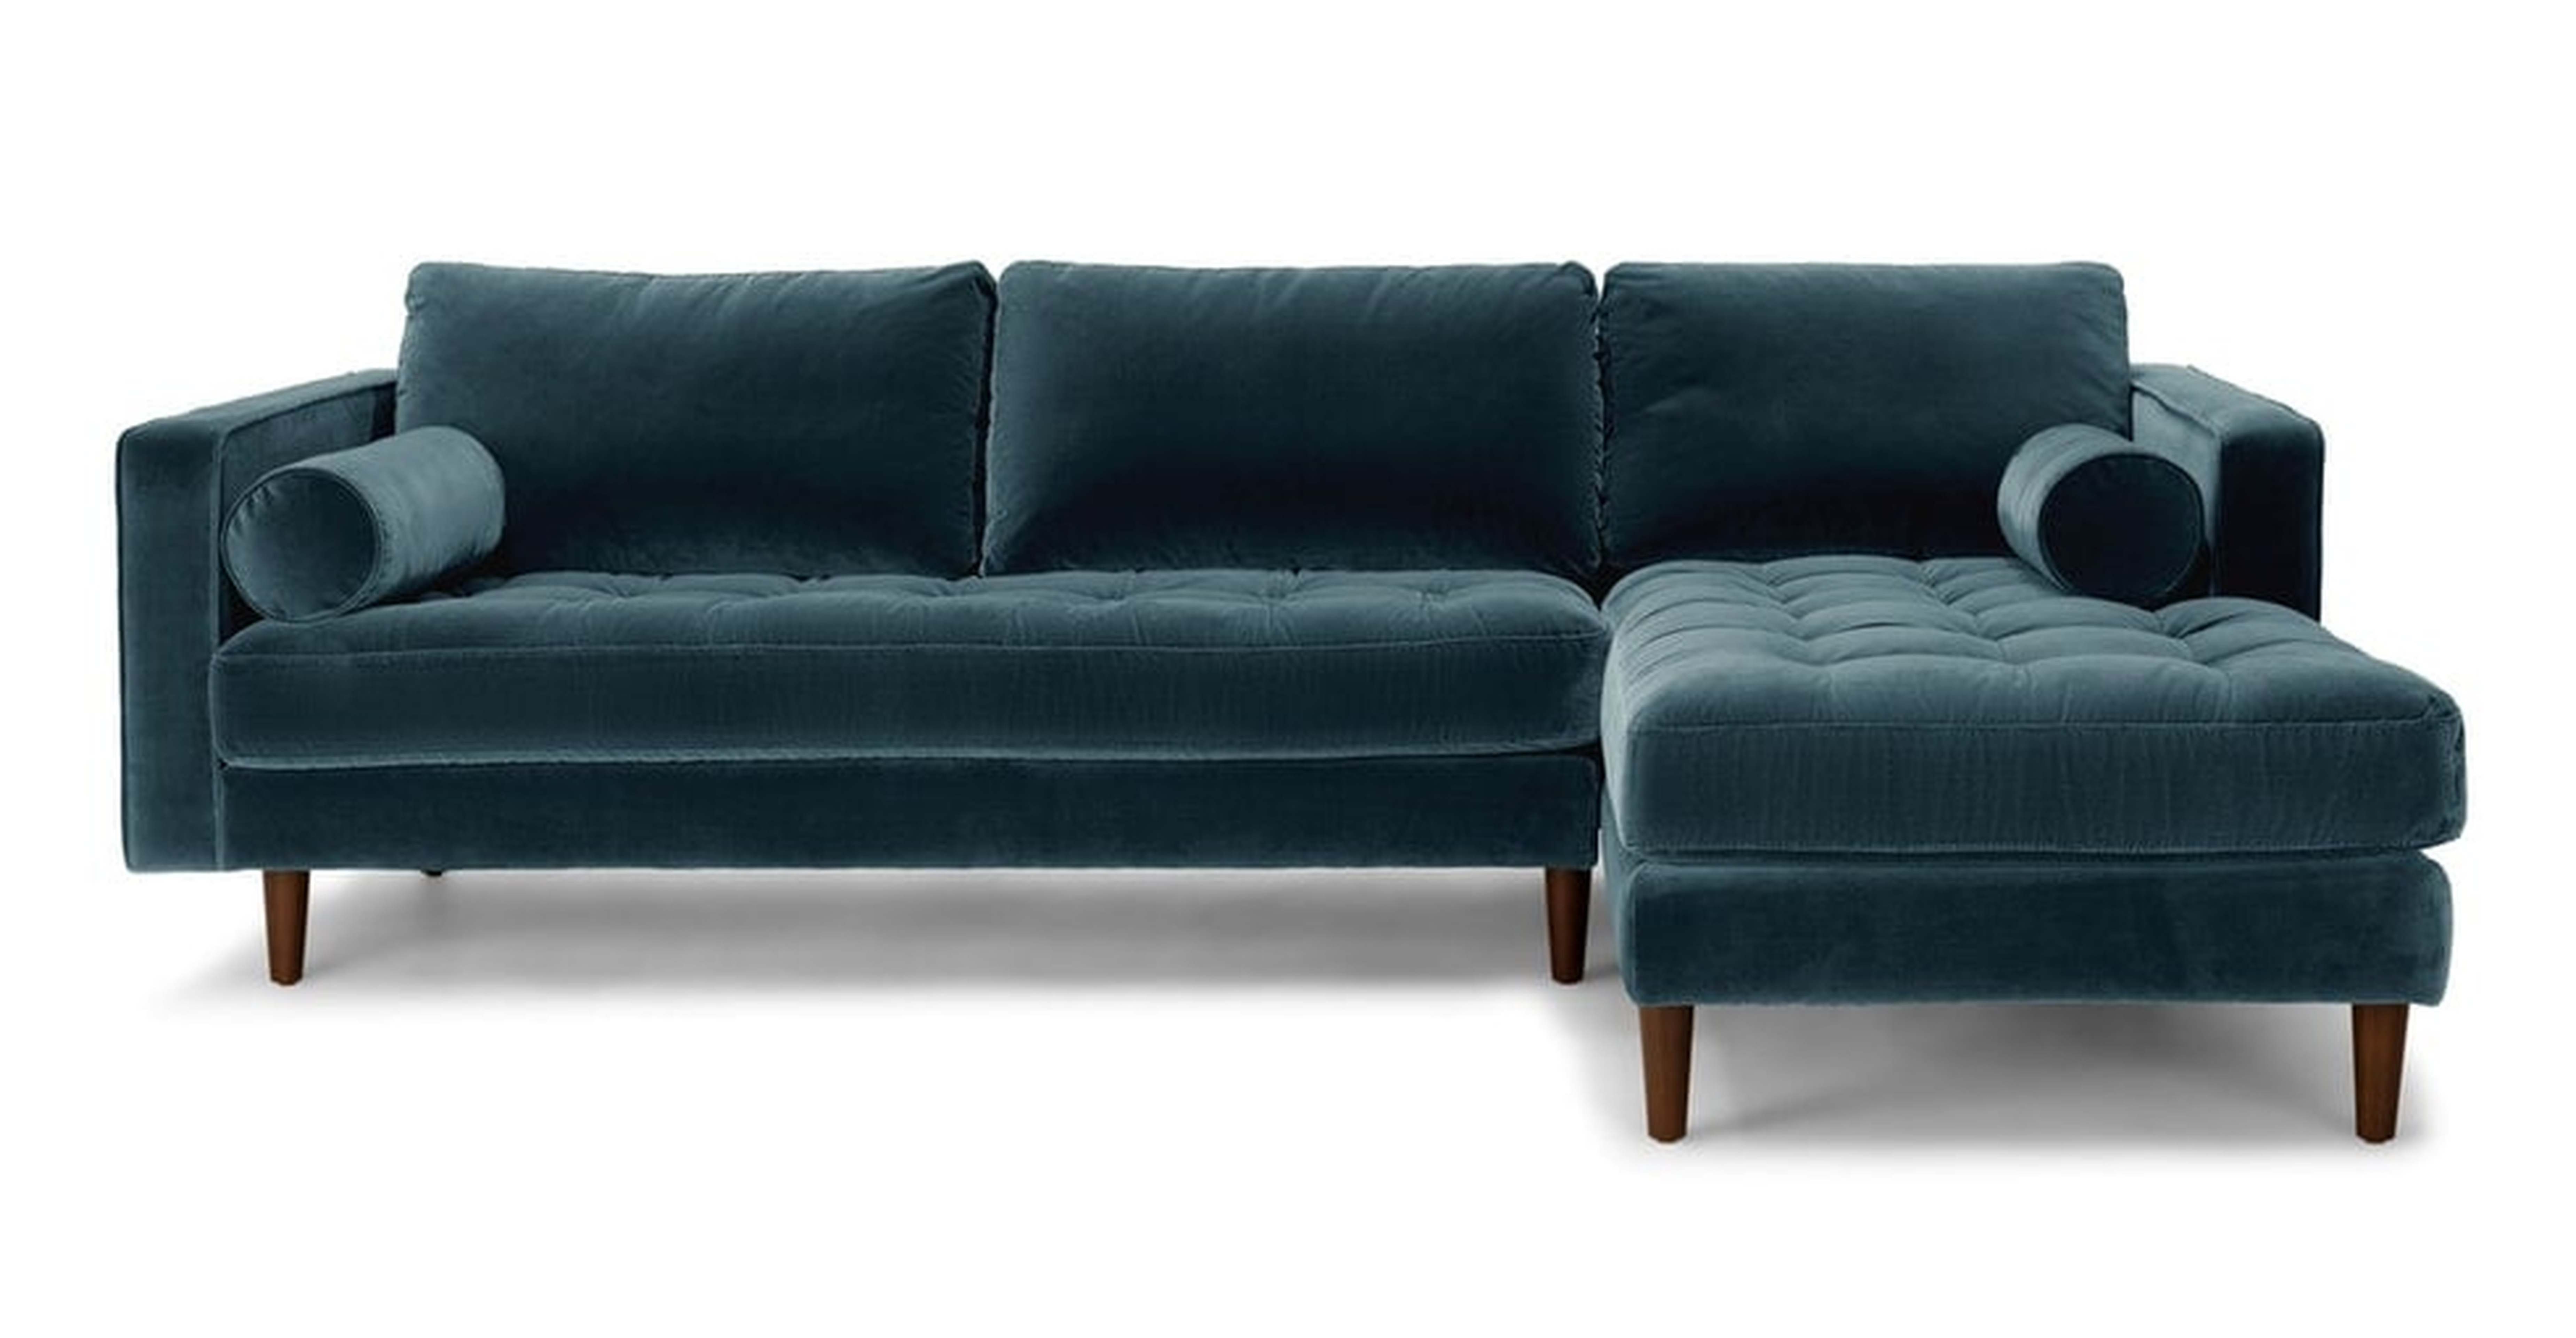 Sven Right Sectional Sofa, Pacific Blue - Article